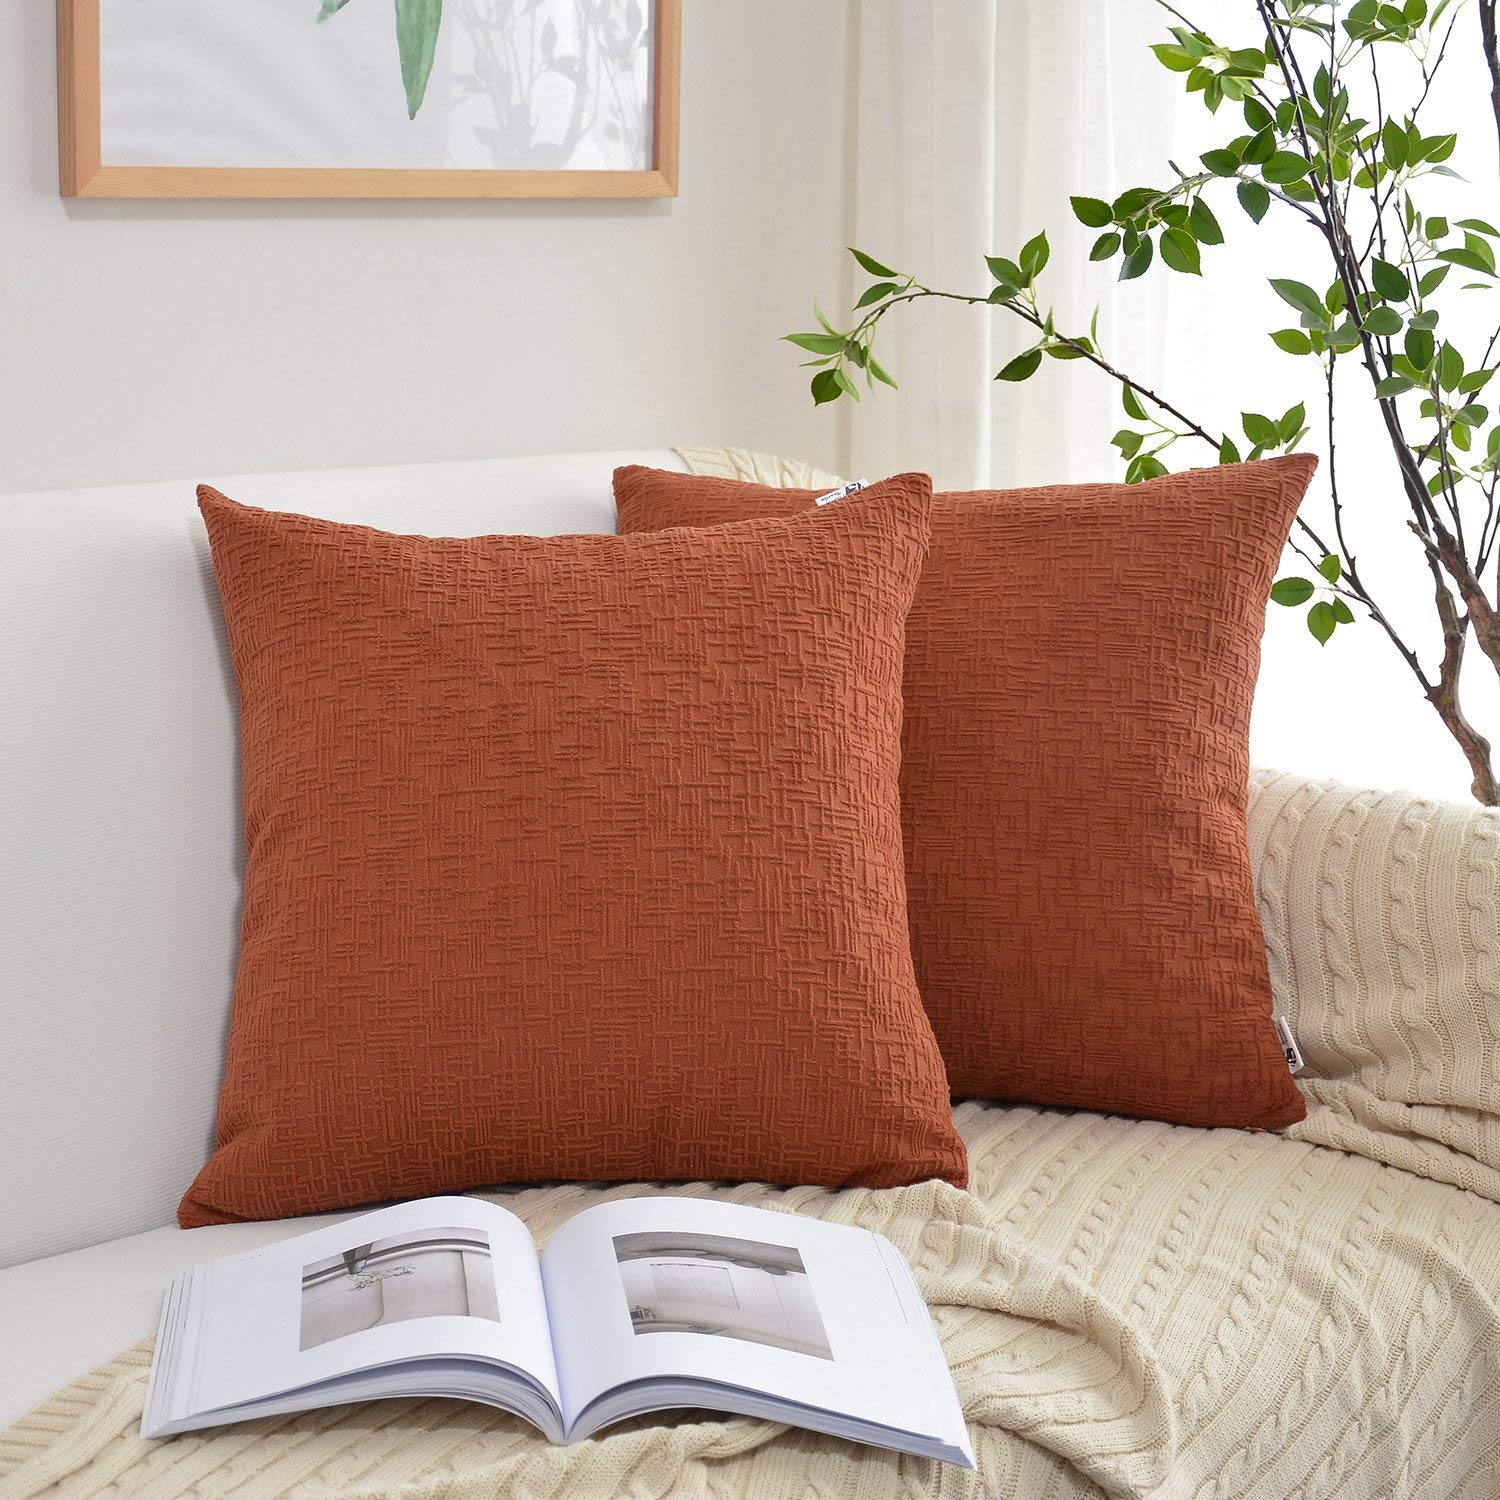 two square terracotta colored pillow covers